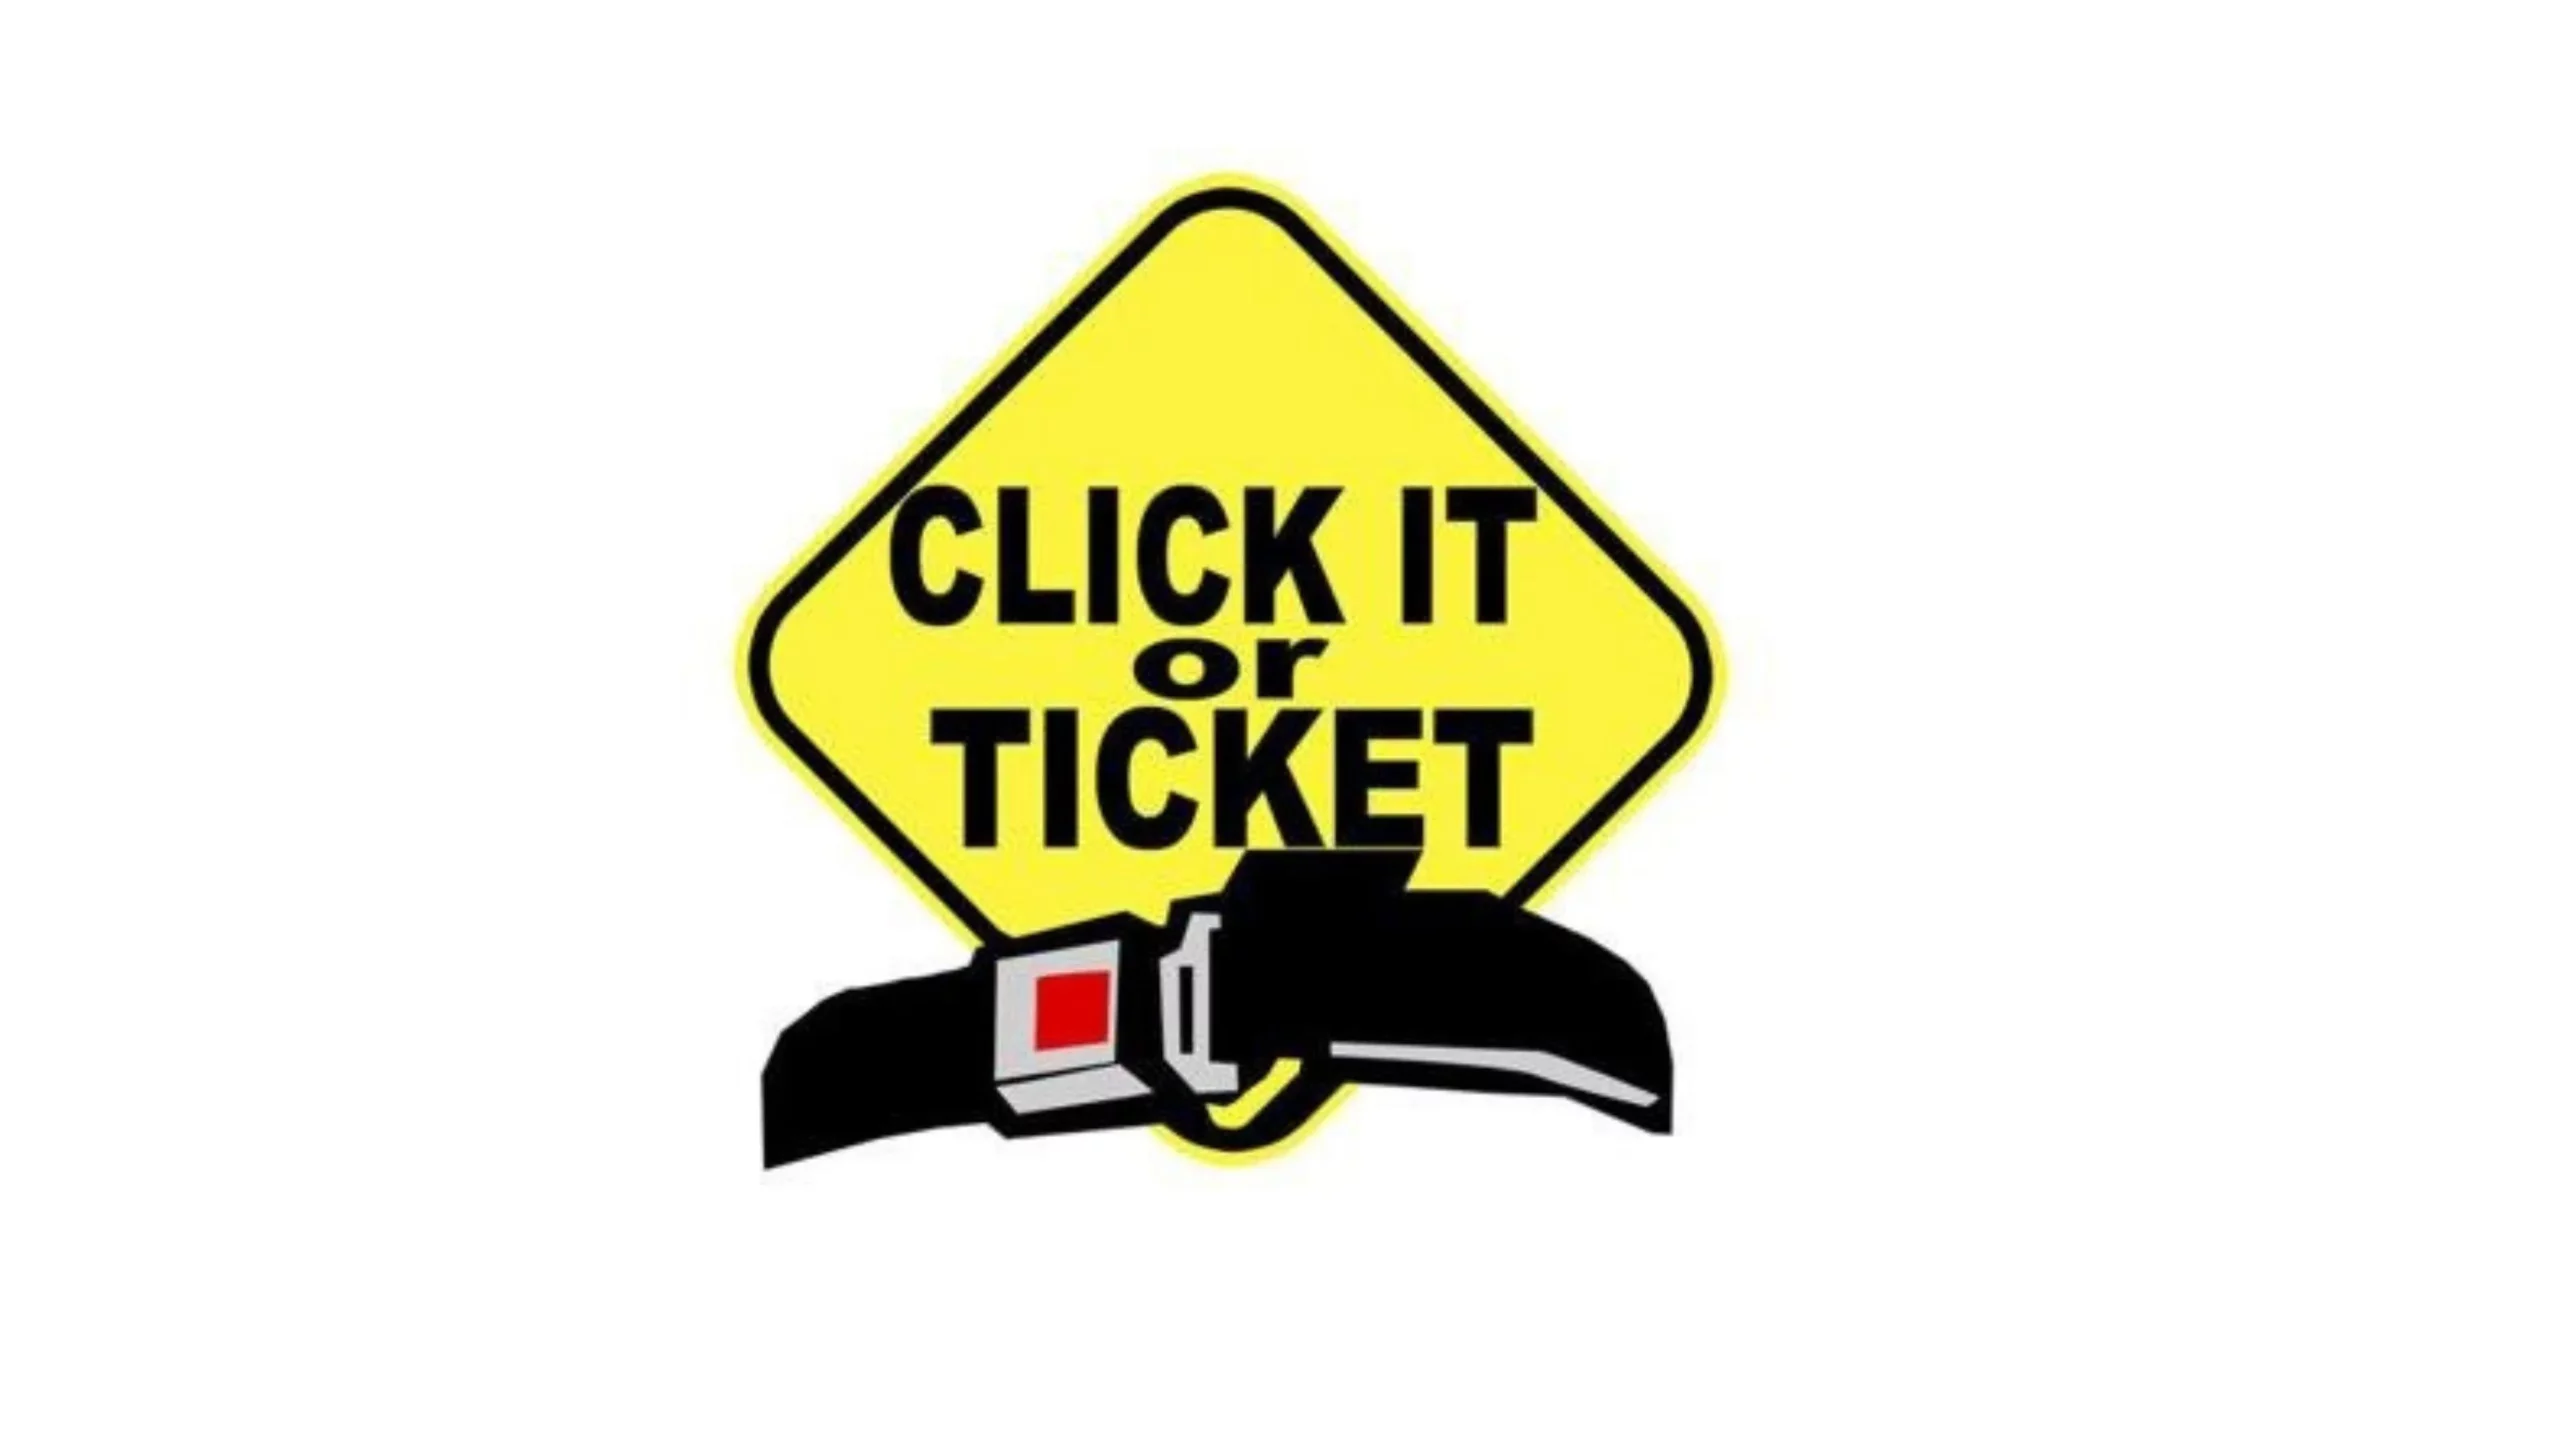 “Teen Click it or Ticket” Urges Buckling Up to Save a Life